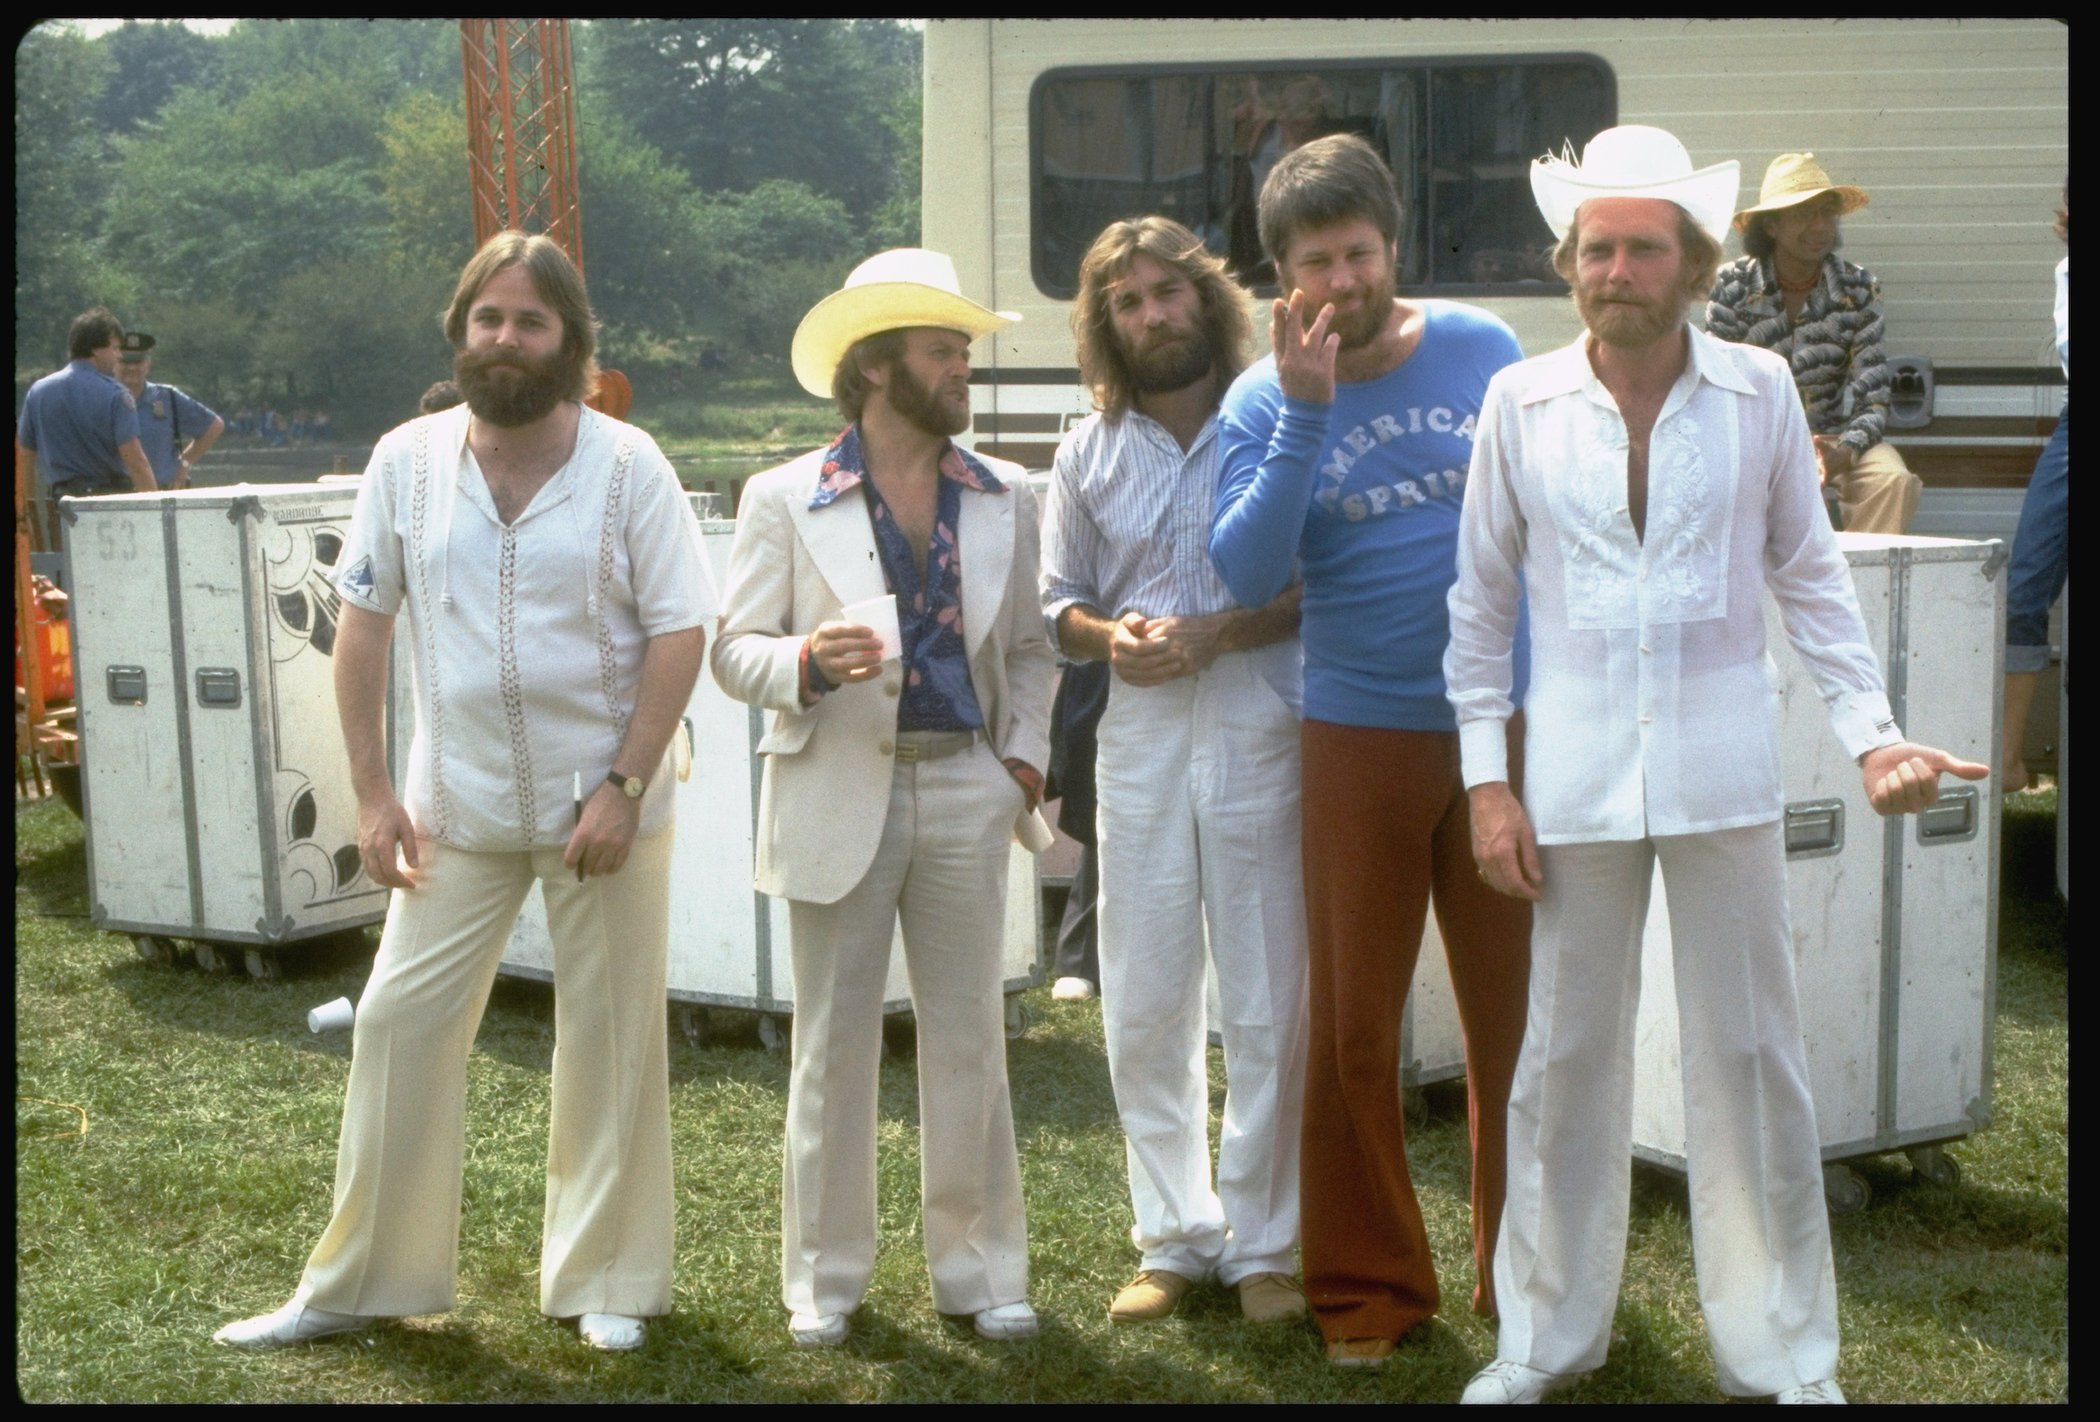 Rock and roll band The Beach Boys pose for a portrait backstage of their concert in Central Park